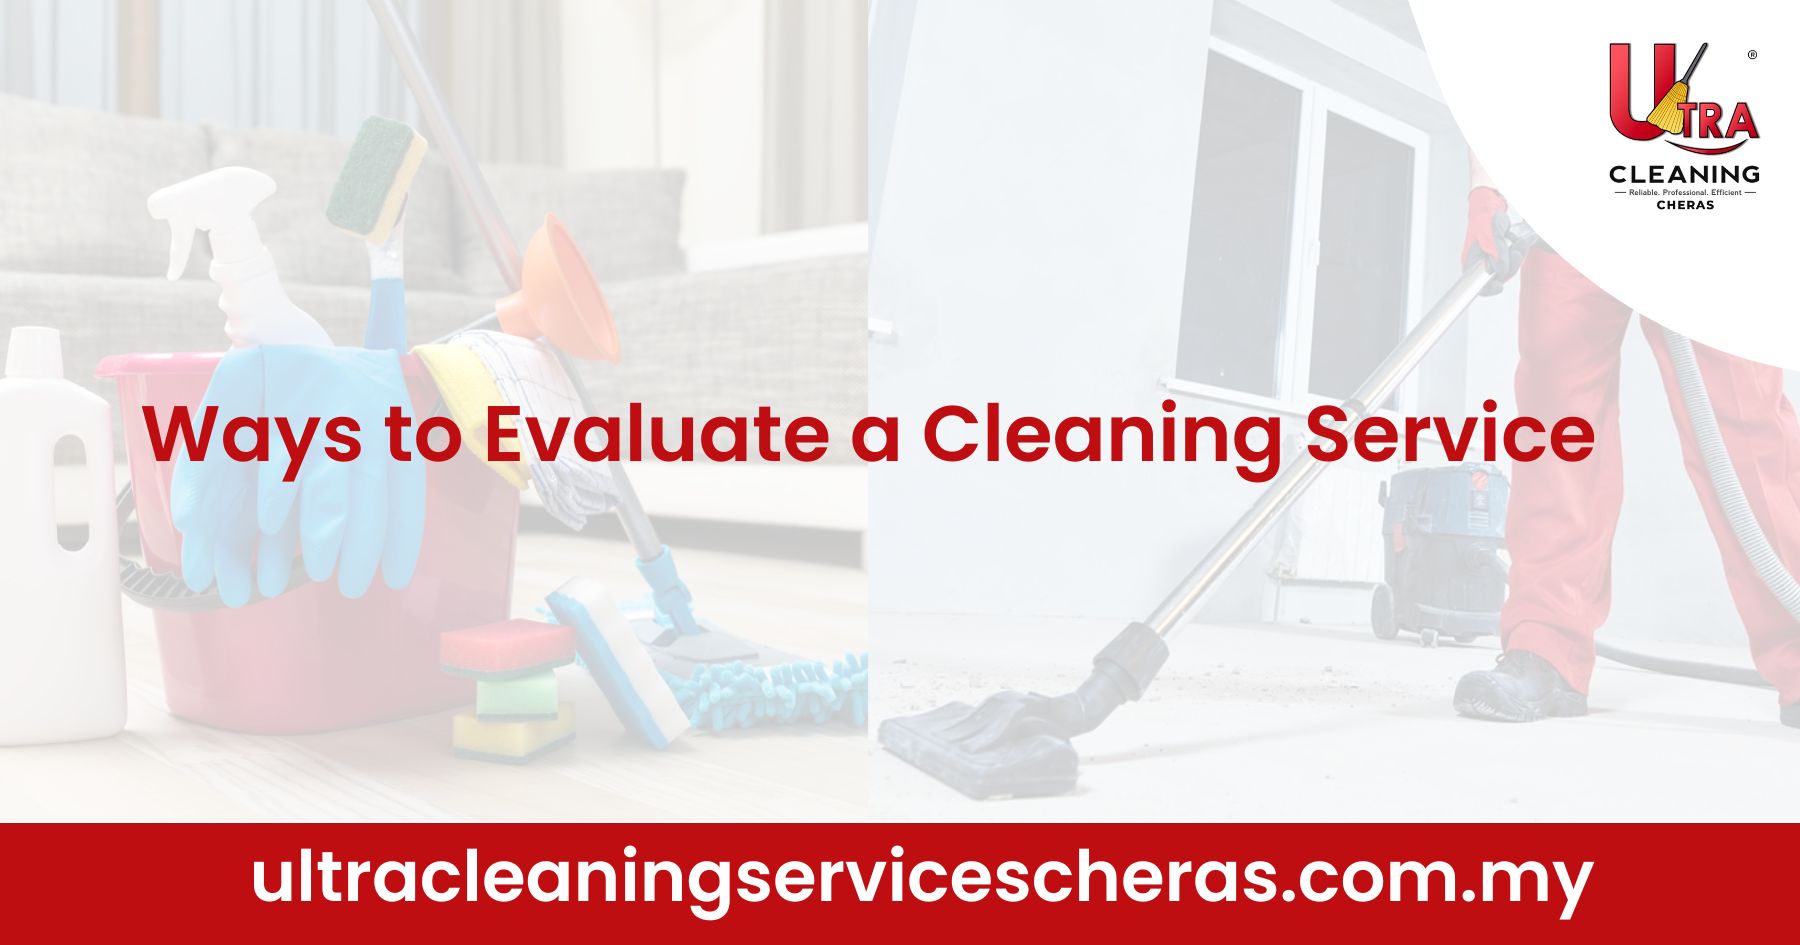 Ways to Evaluate a Cleaning Service